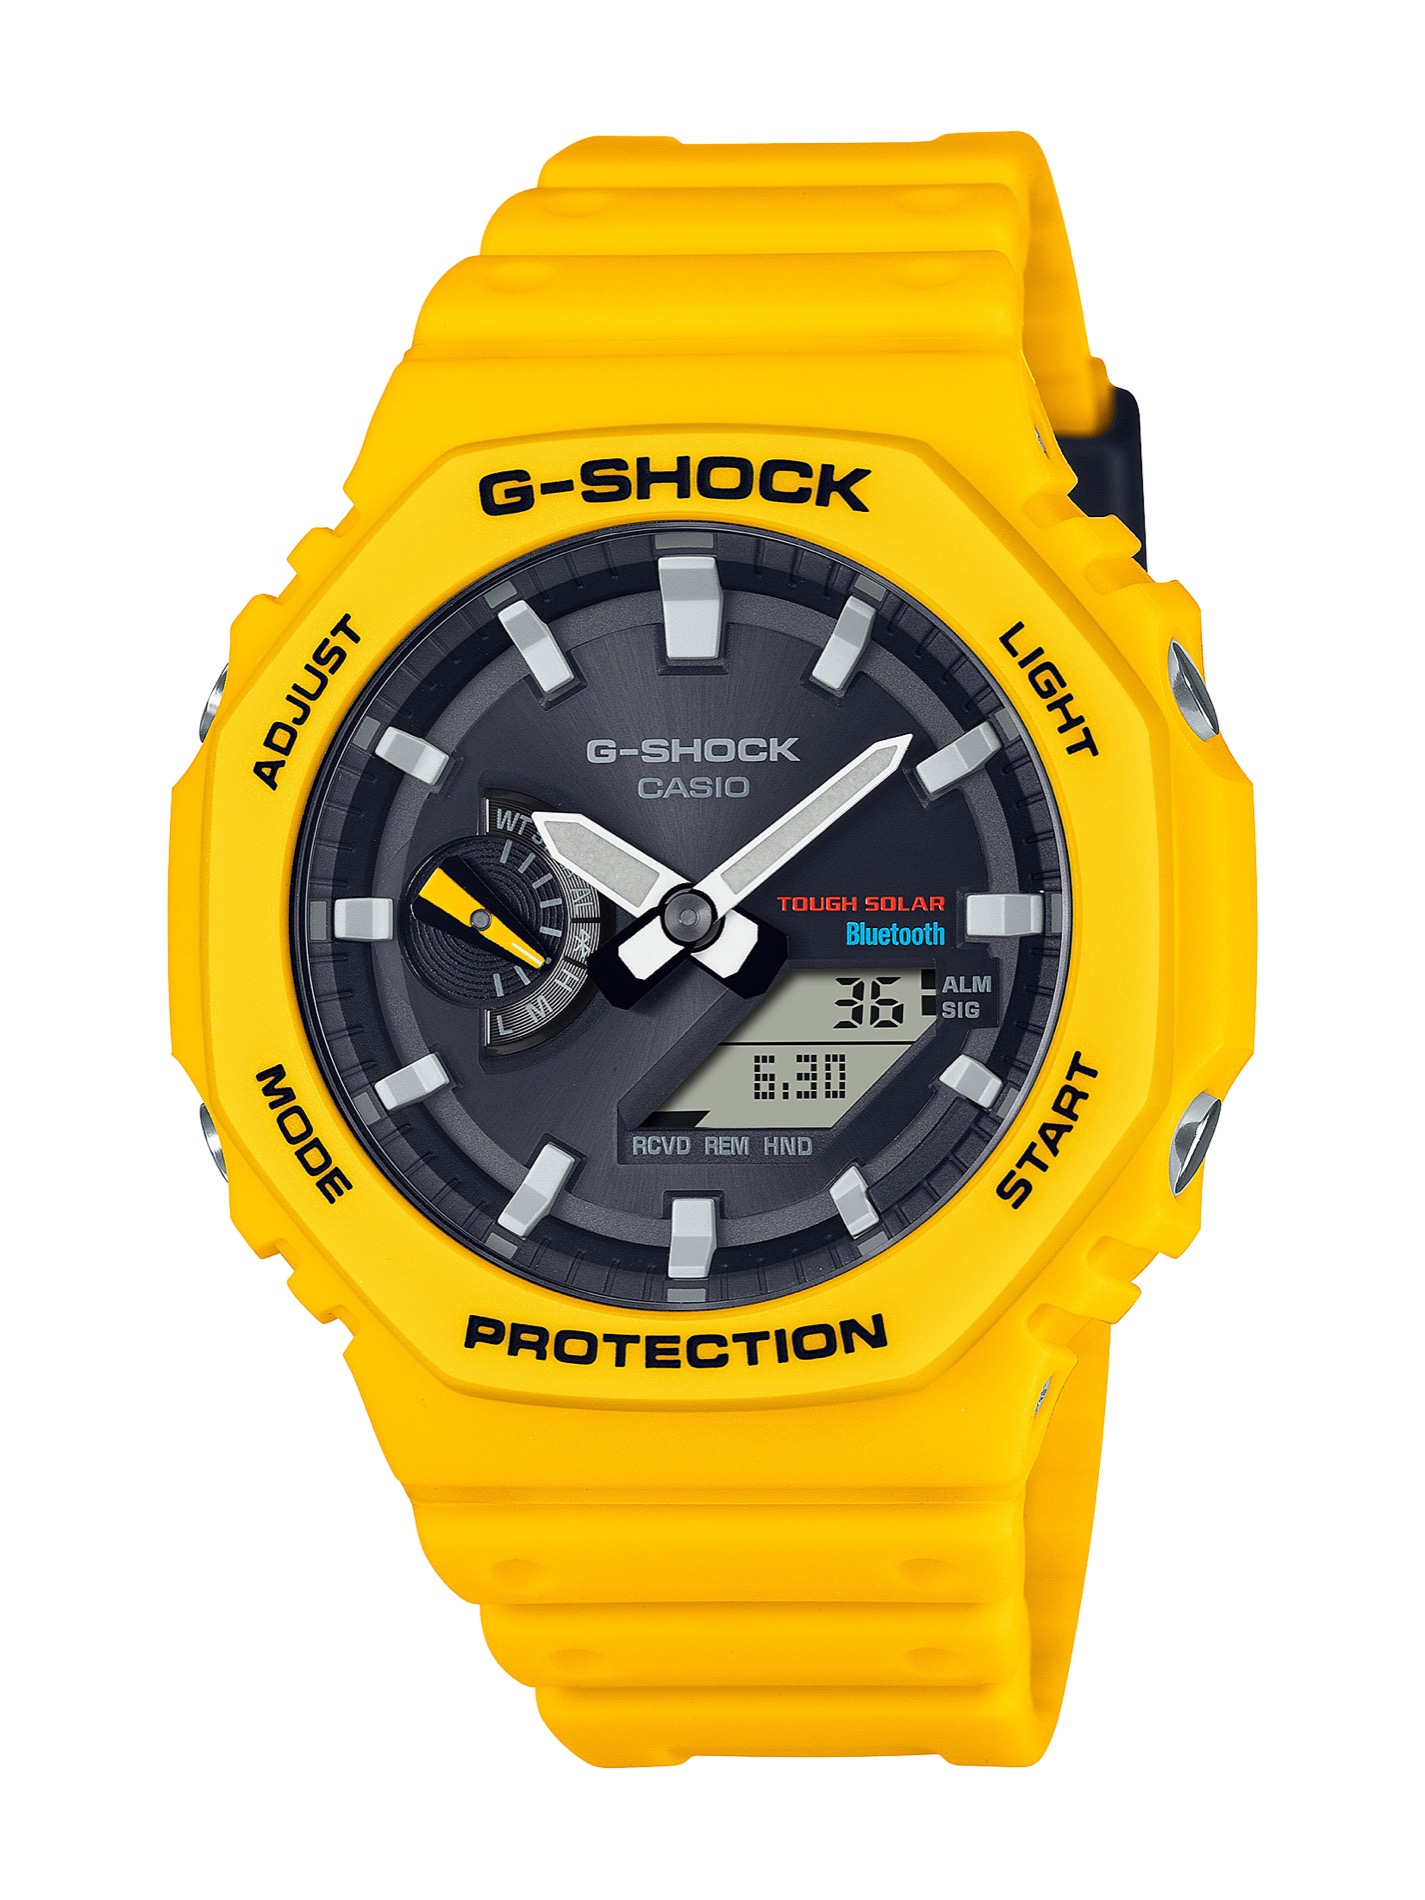 Released: G-Shock - Recently GA-B2100 WristWatchReview